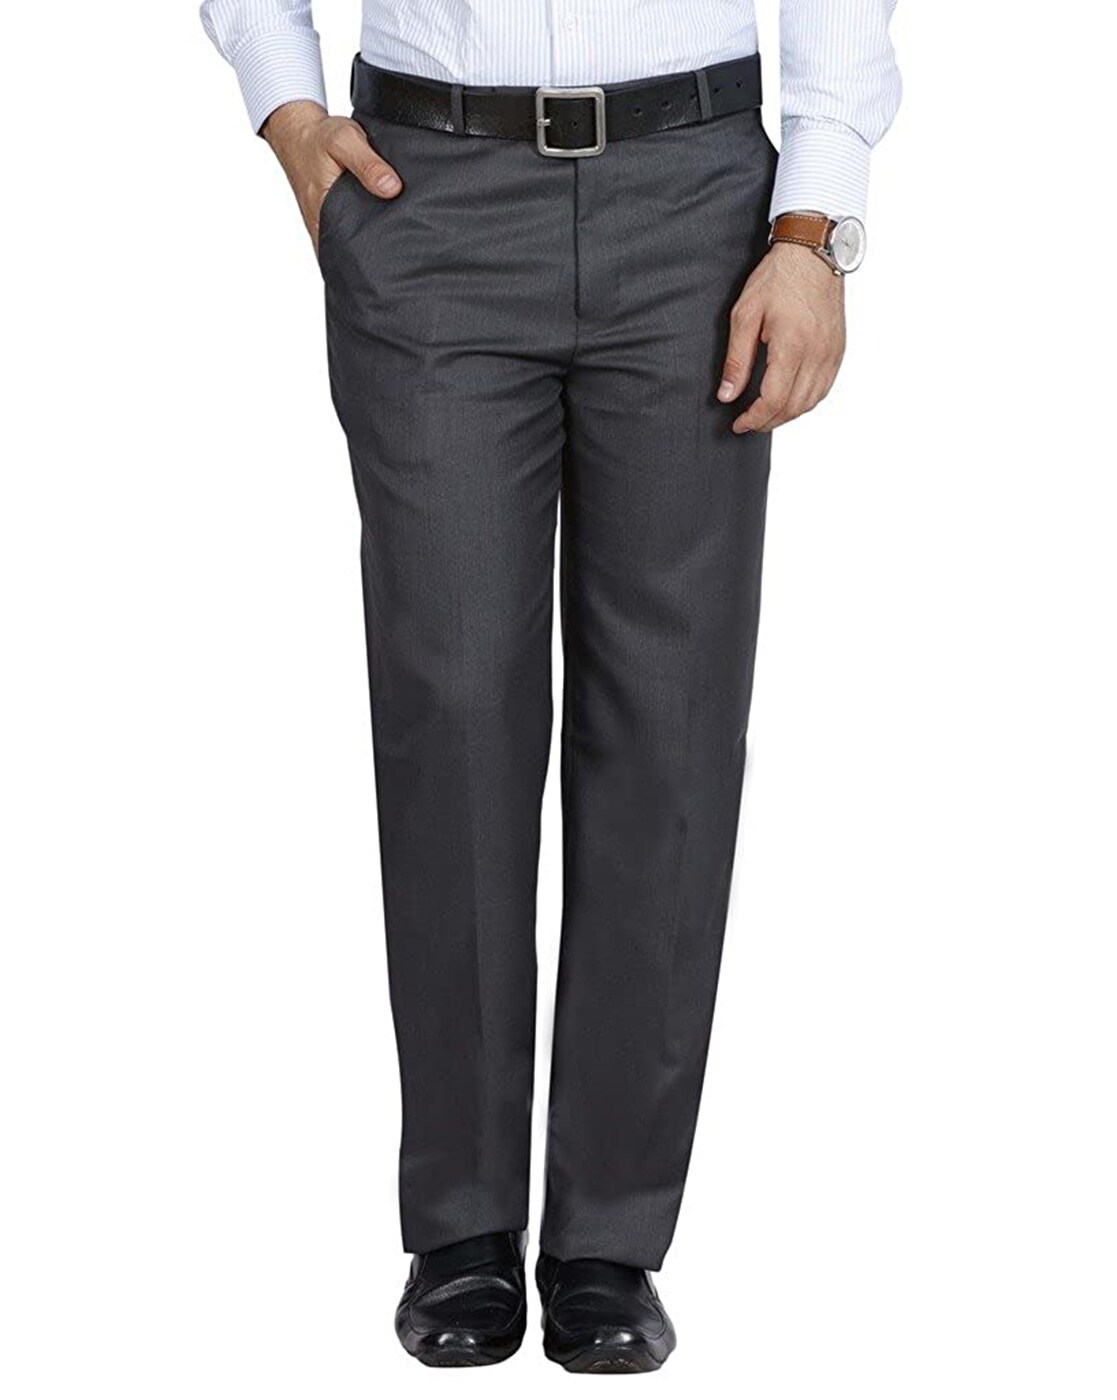 Buy Formals by tside Grey RelaxedFit Trousers online  Looksgudin